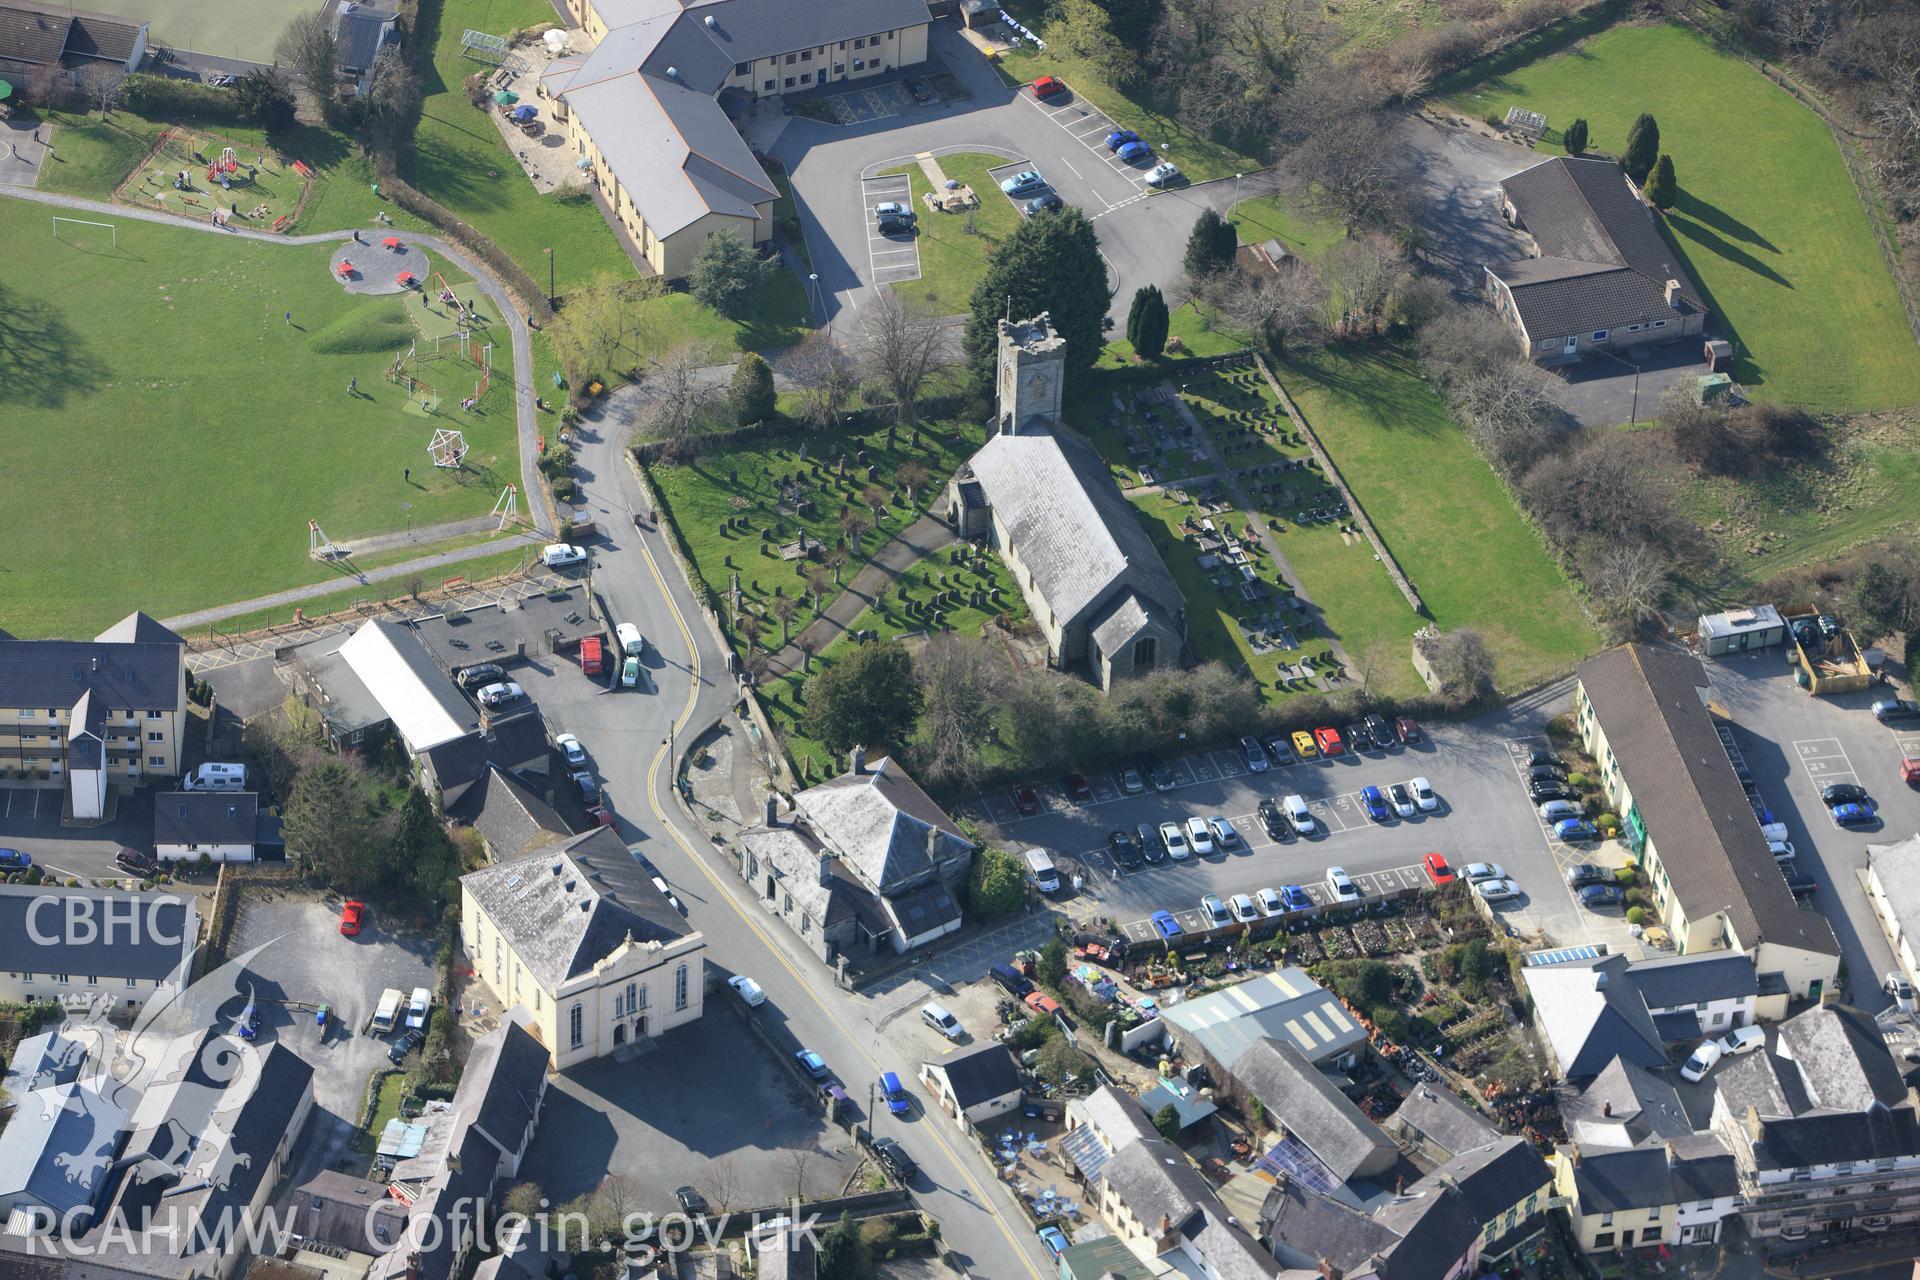 RCAHMW colour oblique aerial photograph of Newcastle Emlyn. Taken on 13 April 2010 by Toby Driver